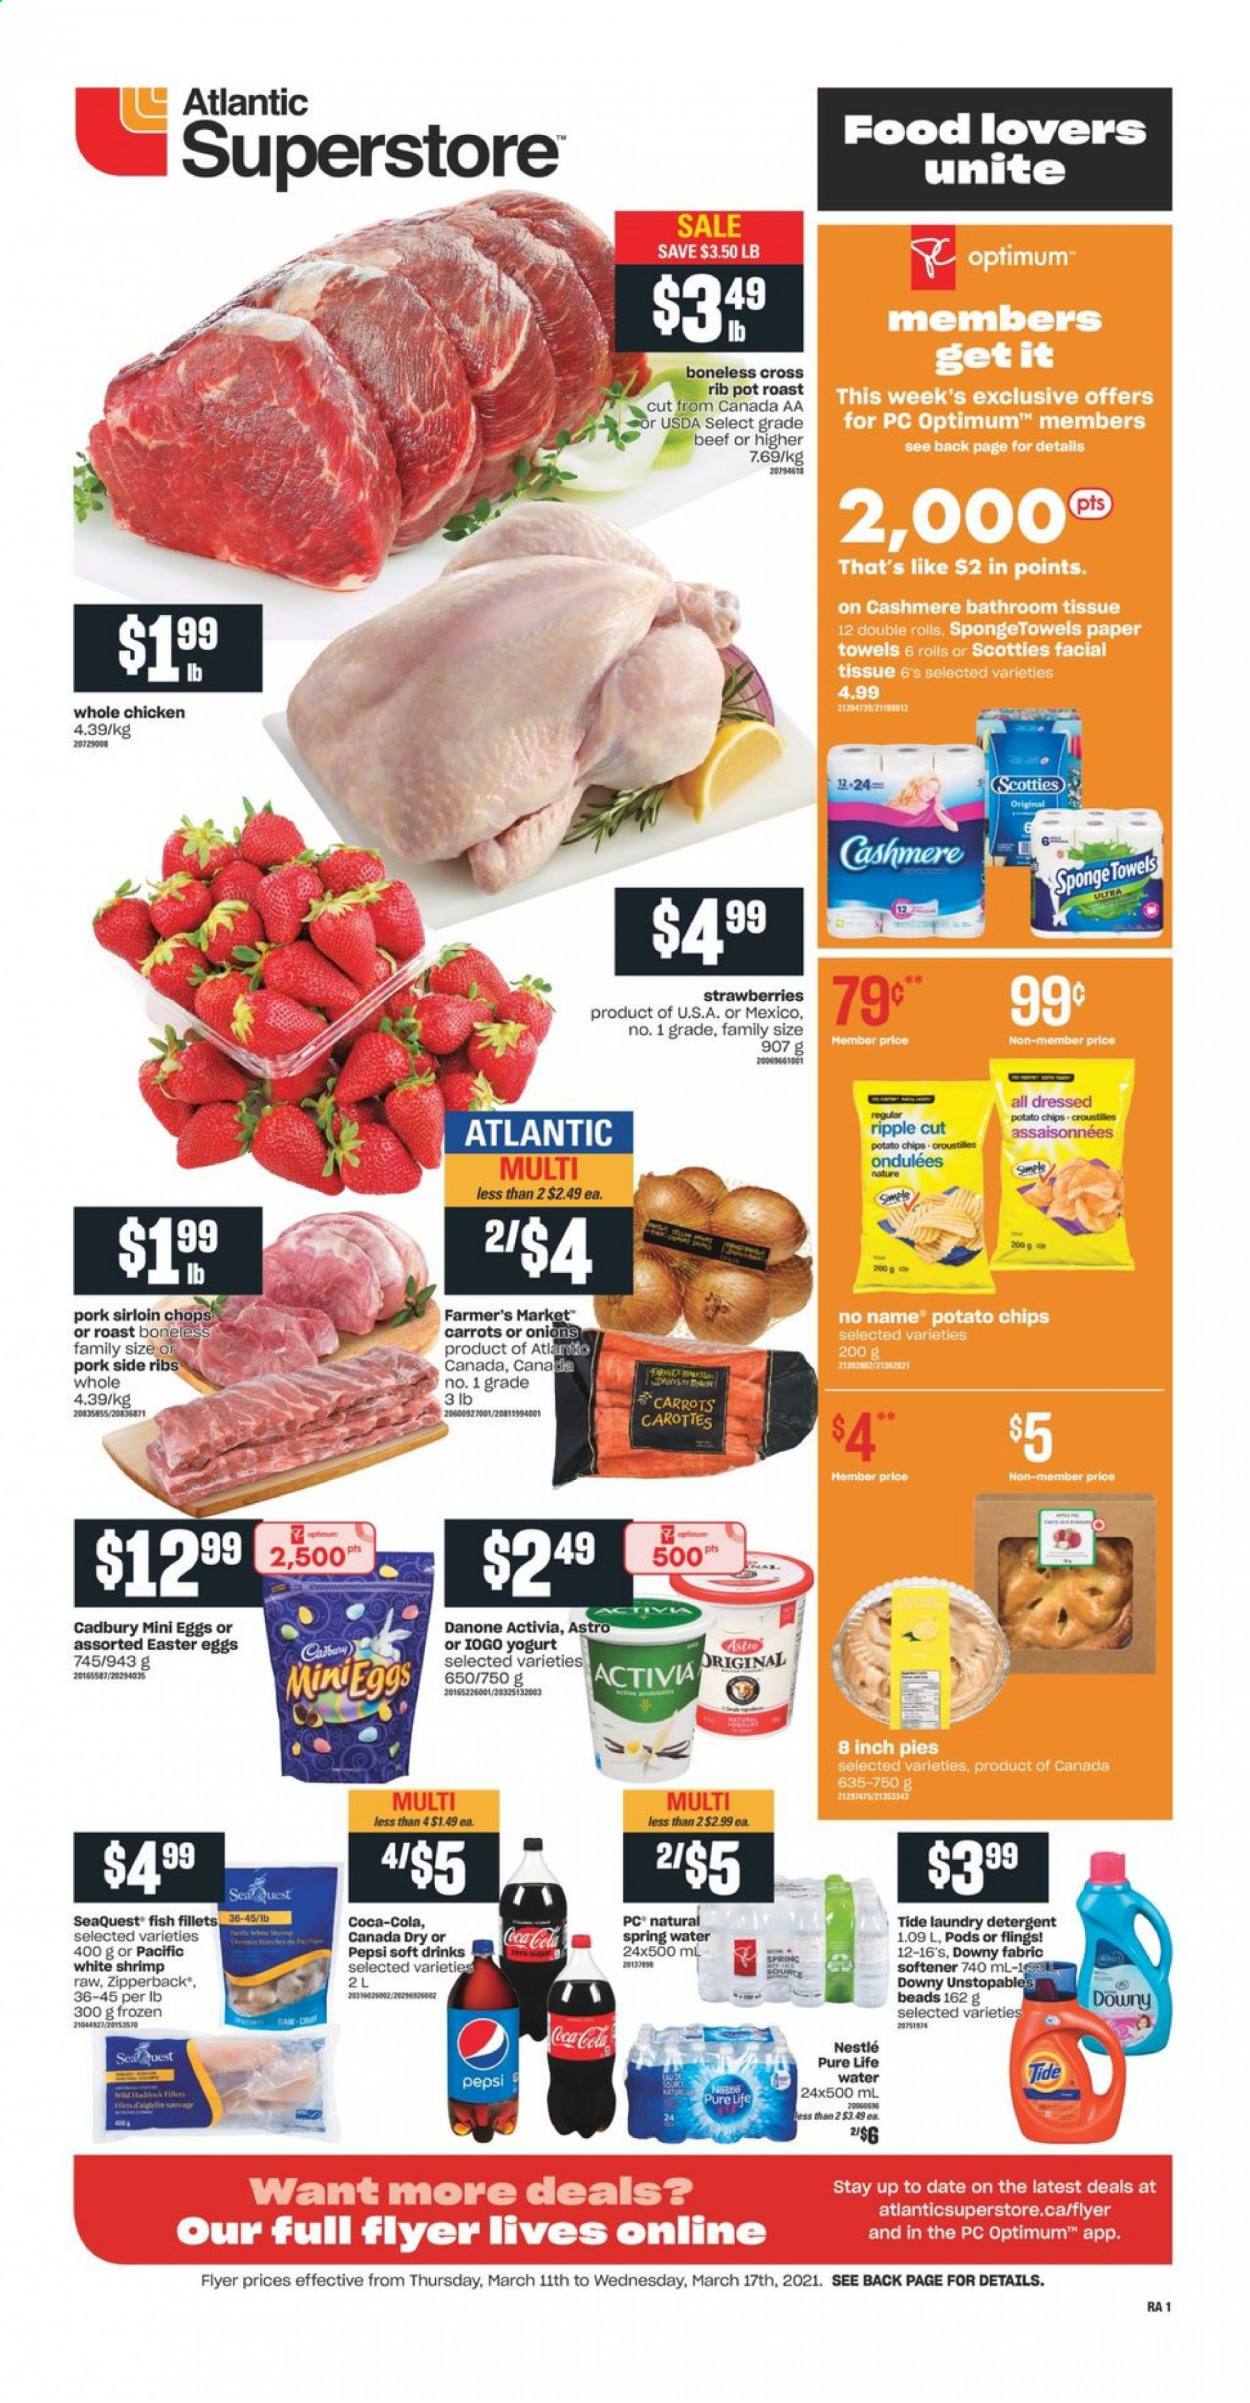 Atlantic Superstore flyer  - March 11, 2021 - March 17, 2021. Page 1.